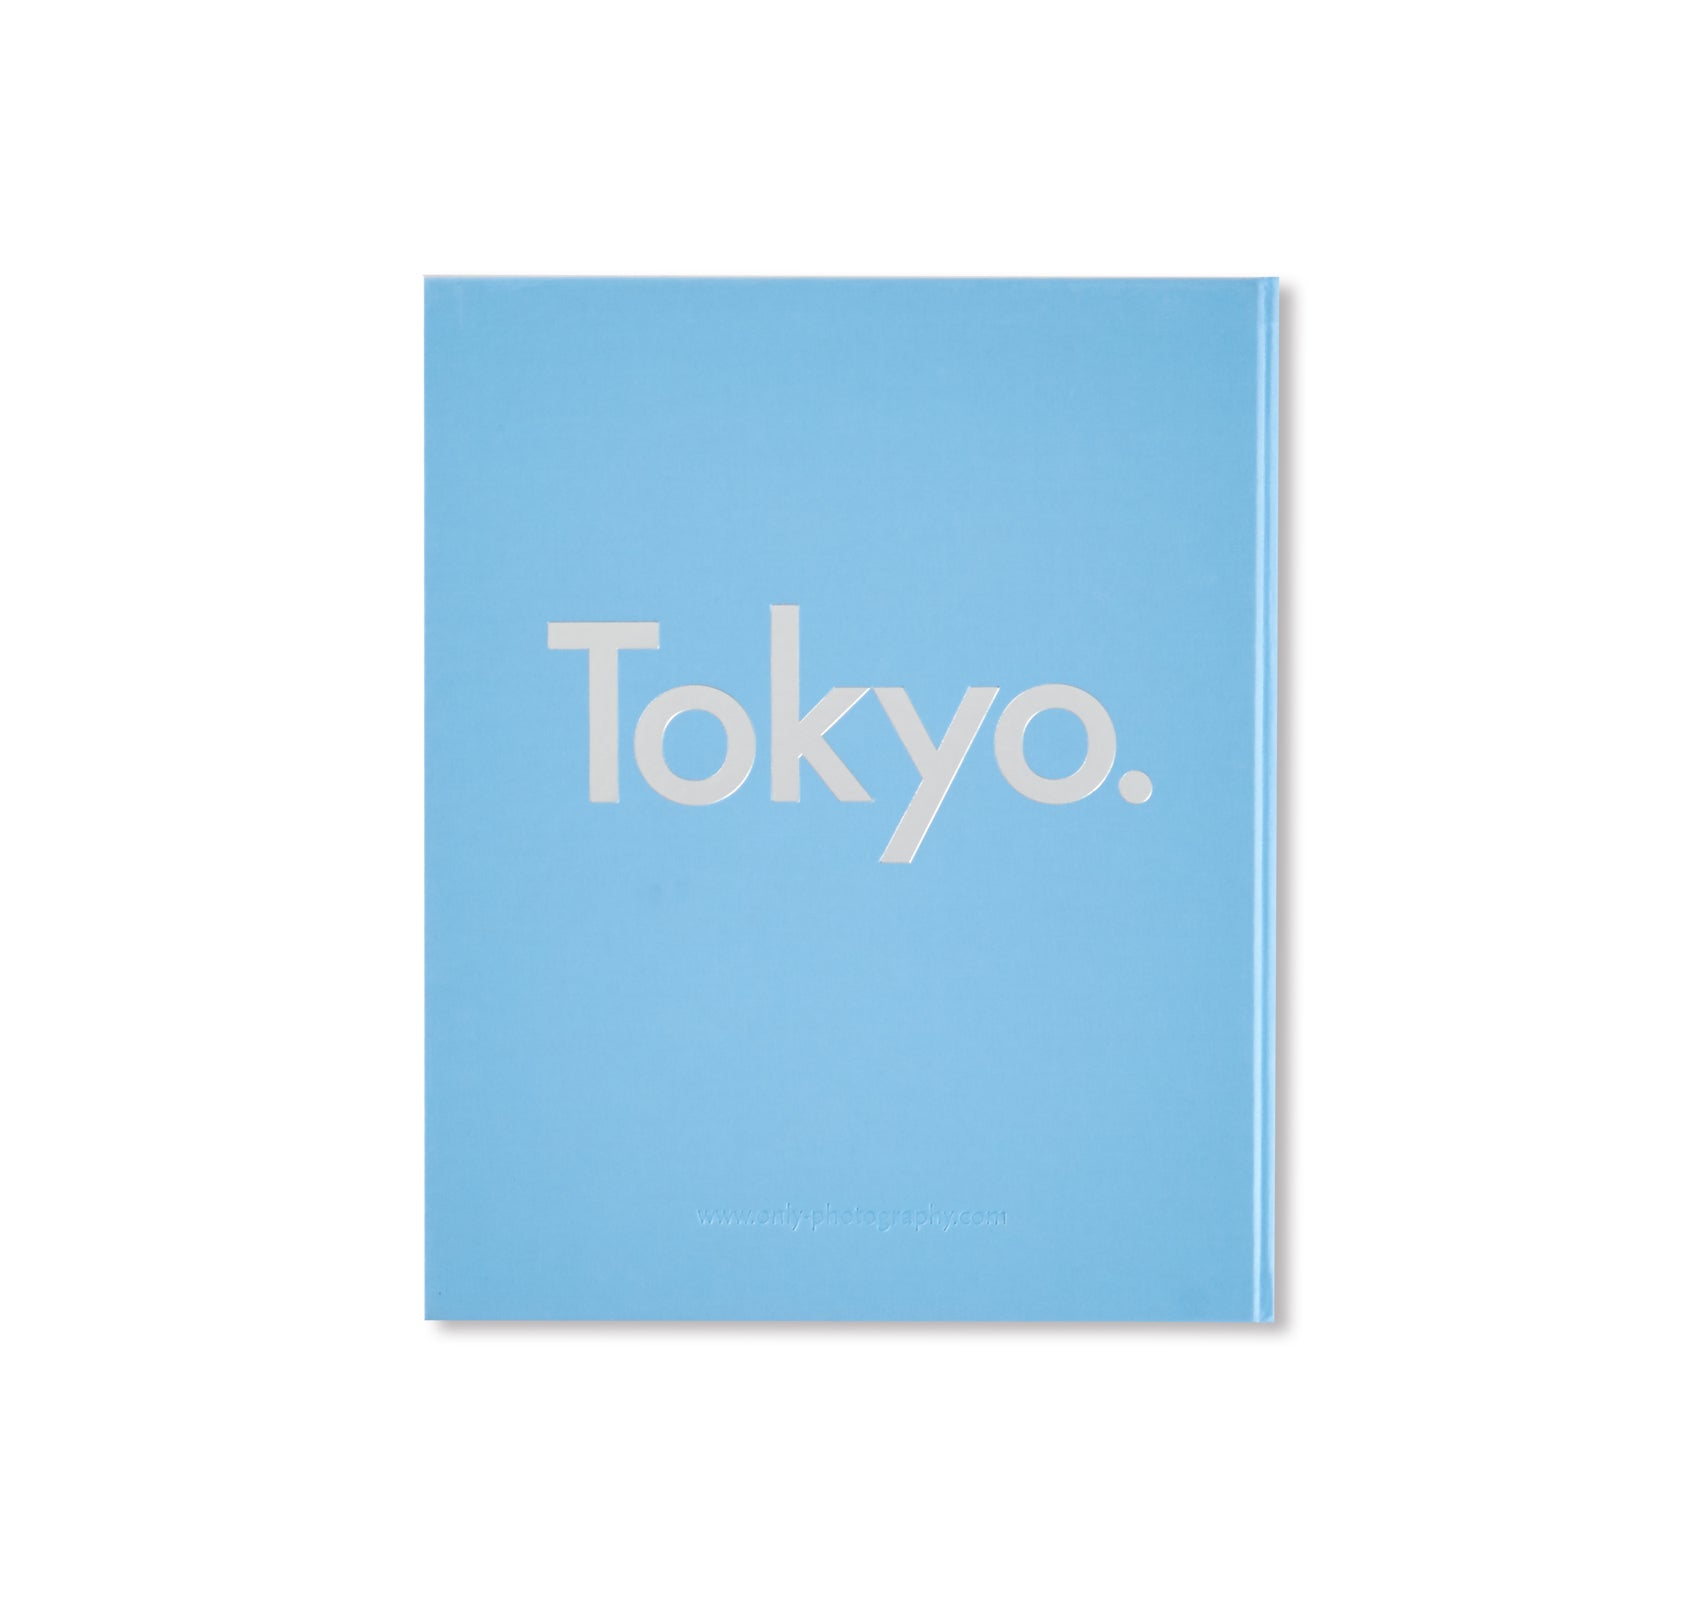 TOKYO by Gerry Johansson [SIGNED]